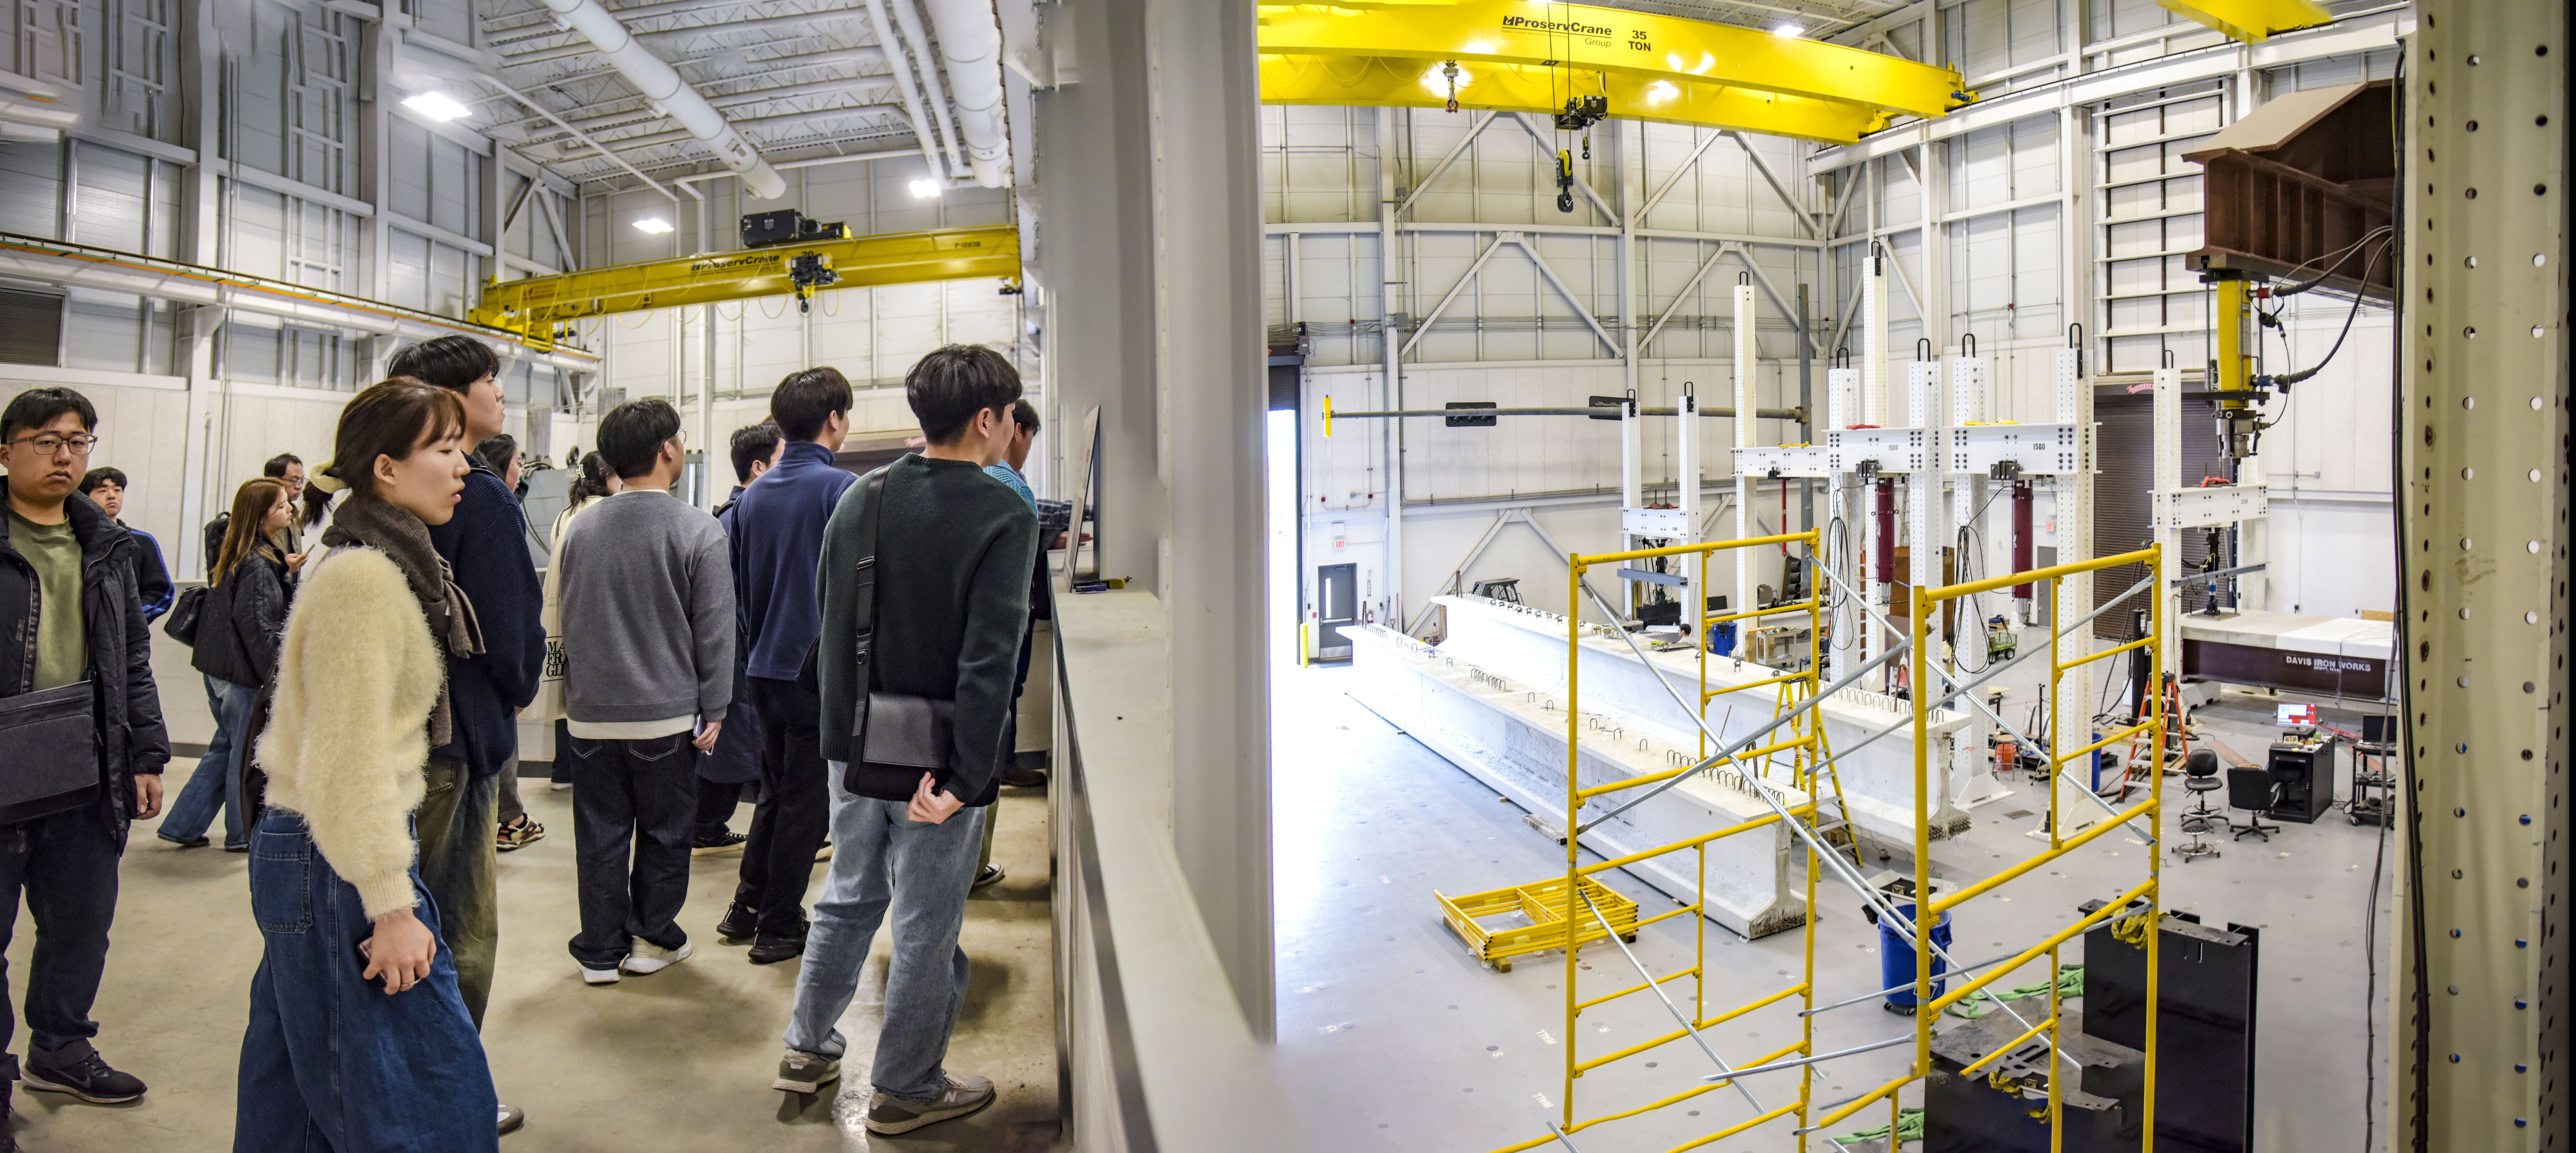 Members from the KAIST Program tour the High Bay laboratory at the Center for Infrastructure Renewal building.